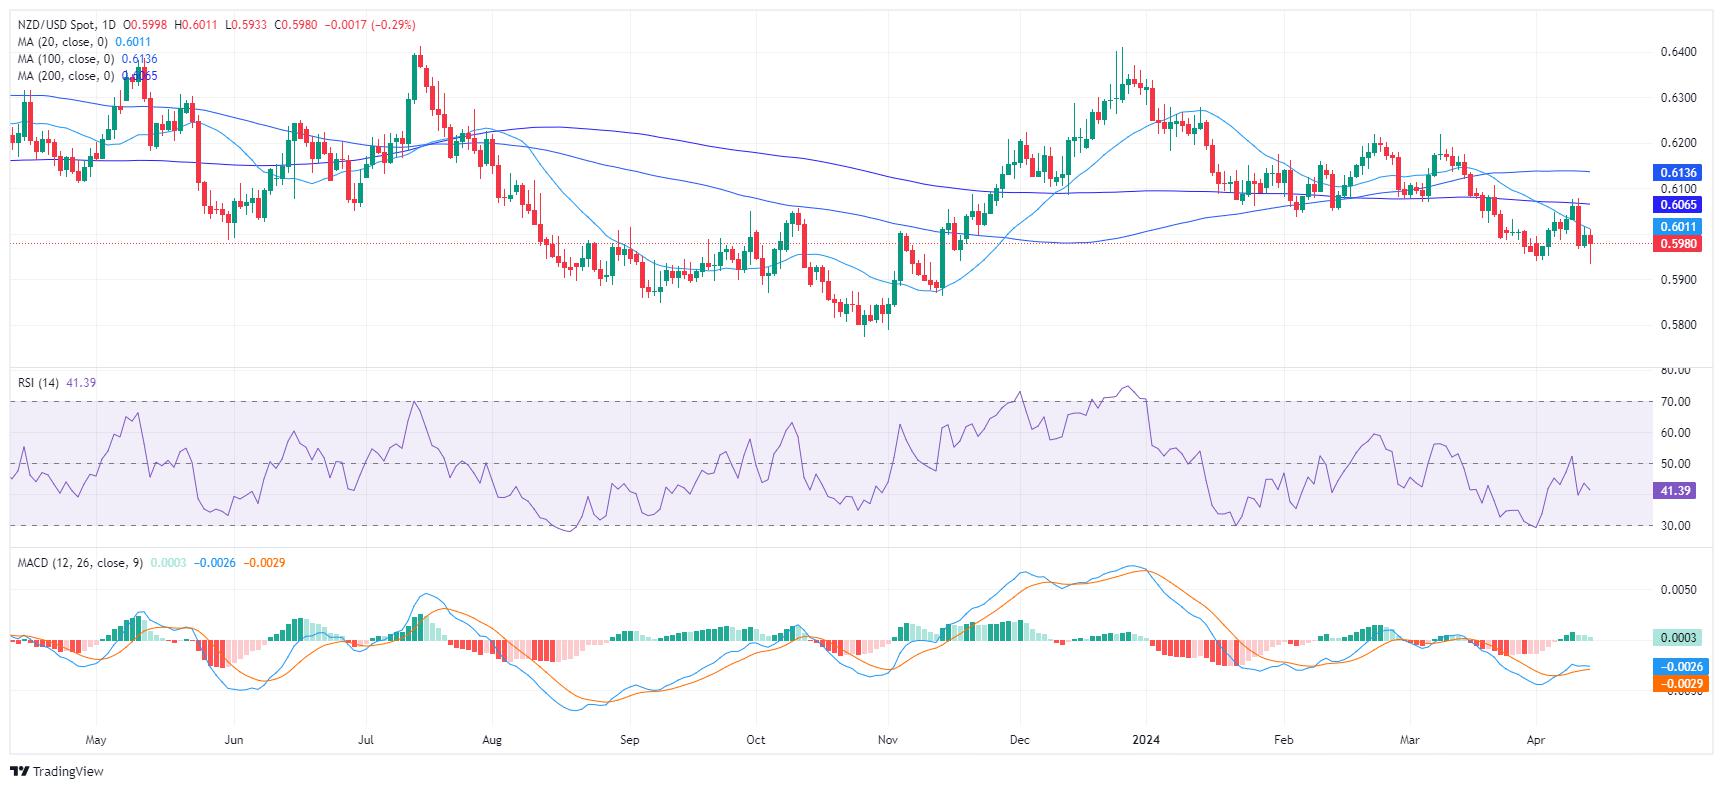 NZD/USD Price Analysis: Bearish dominance persists, signs of short-term bullish recovery detected